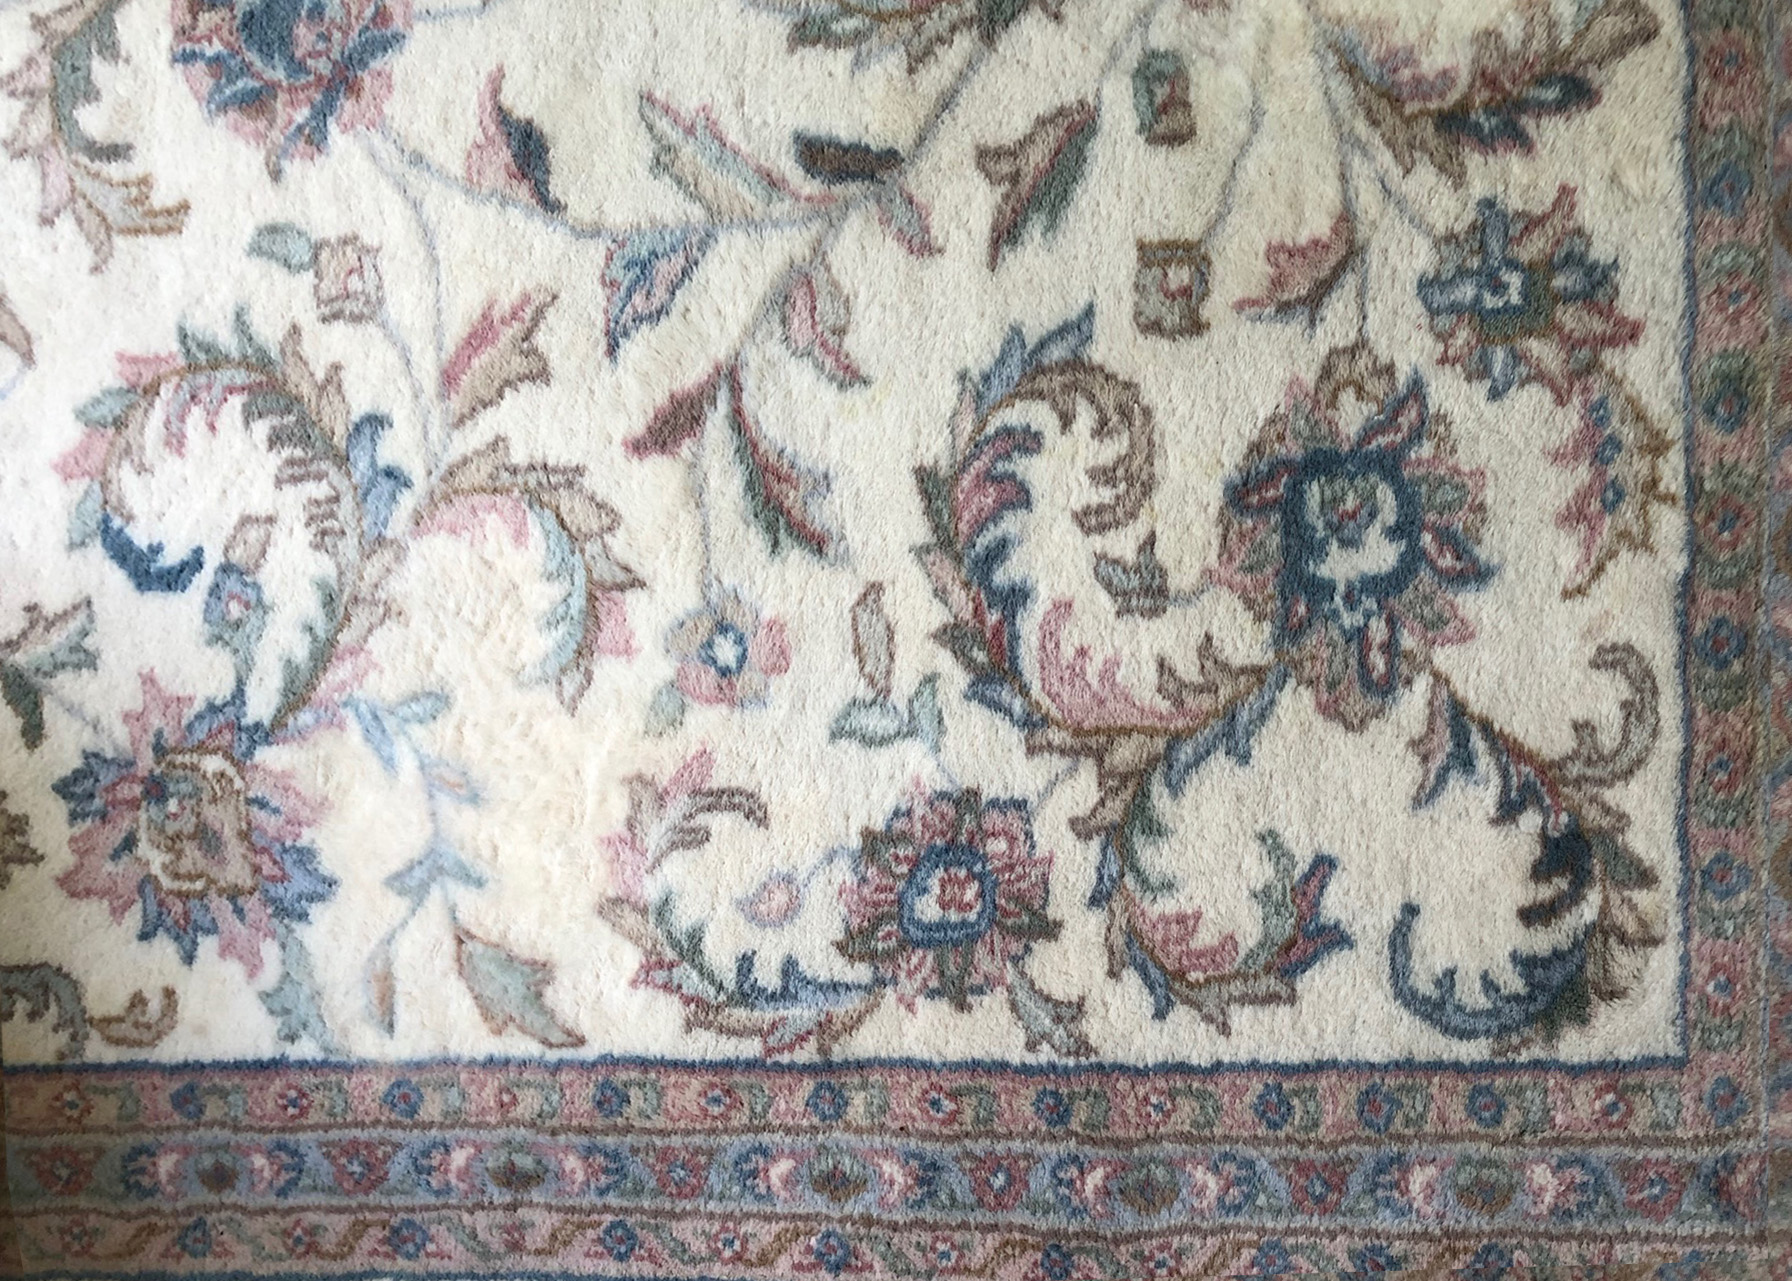 After-Pet stain removal and color restoration on Persian rug.